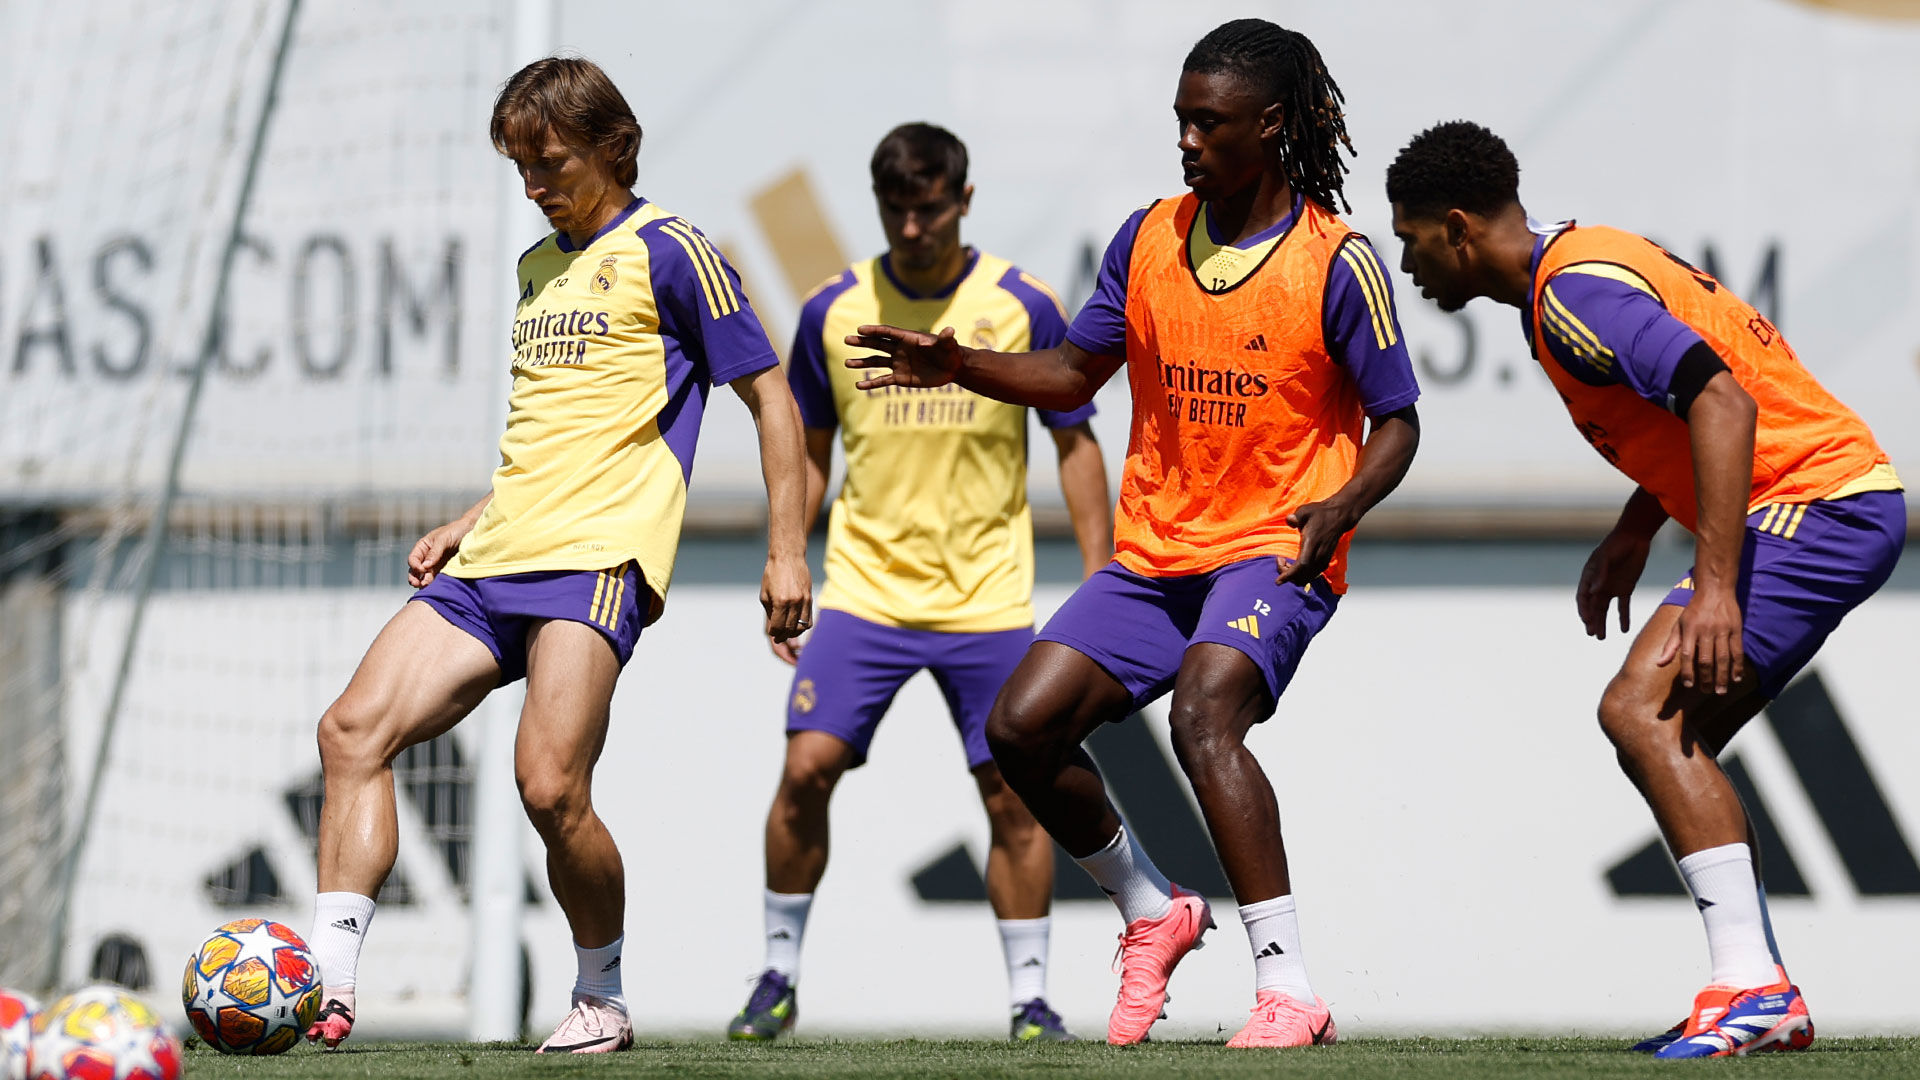 Second session of the week in preparation for the Champions League final